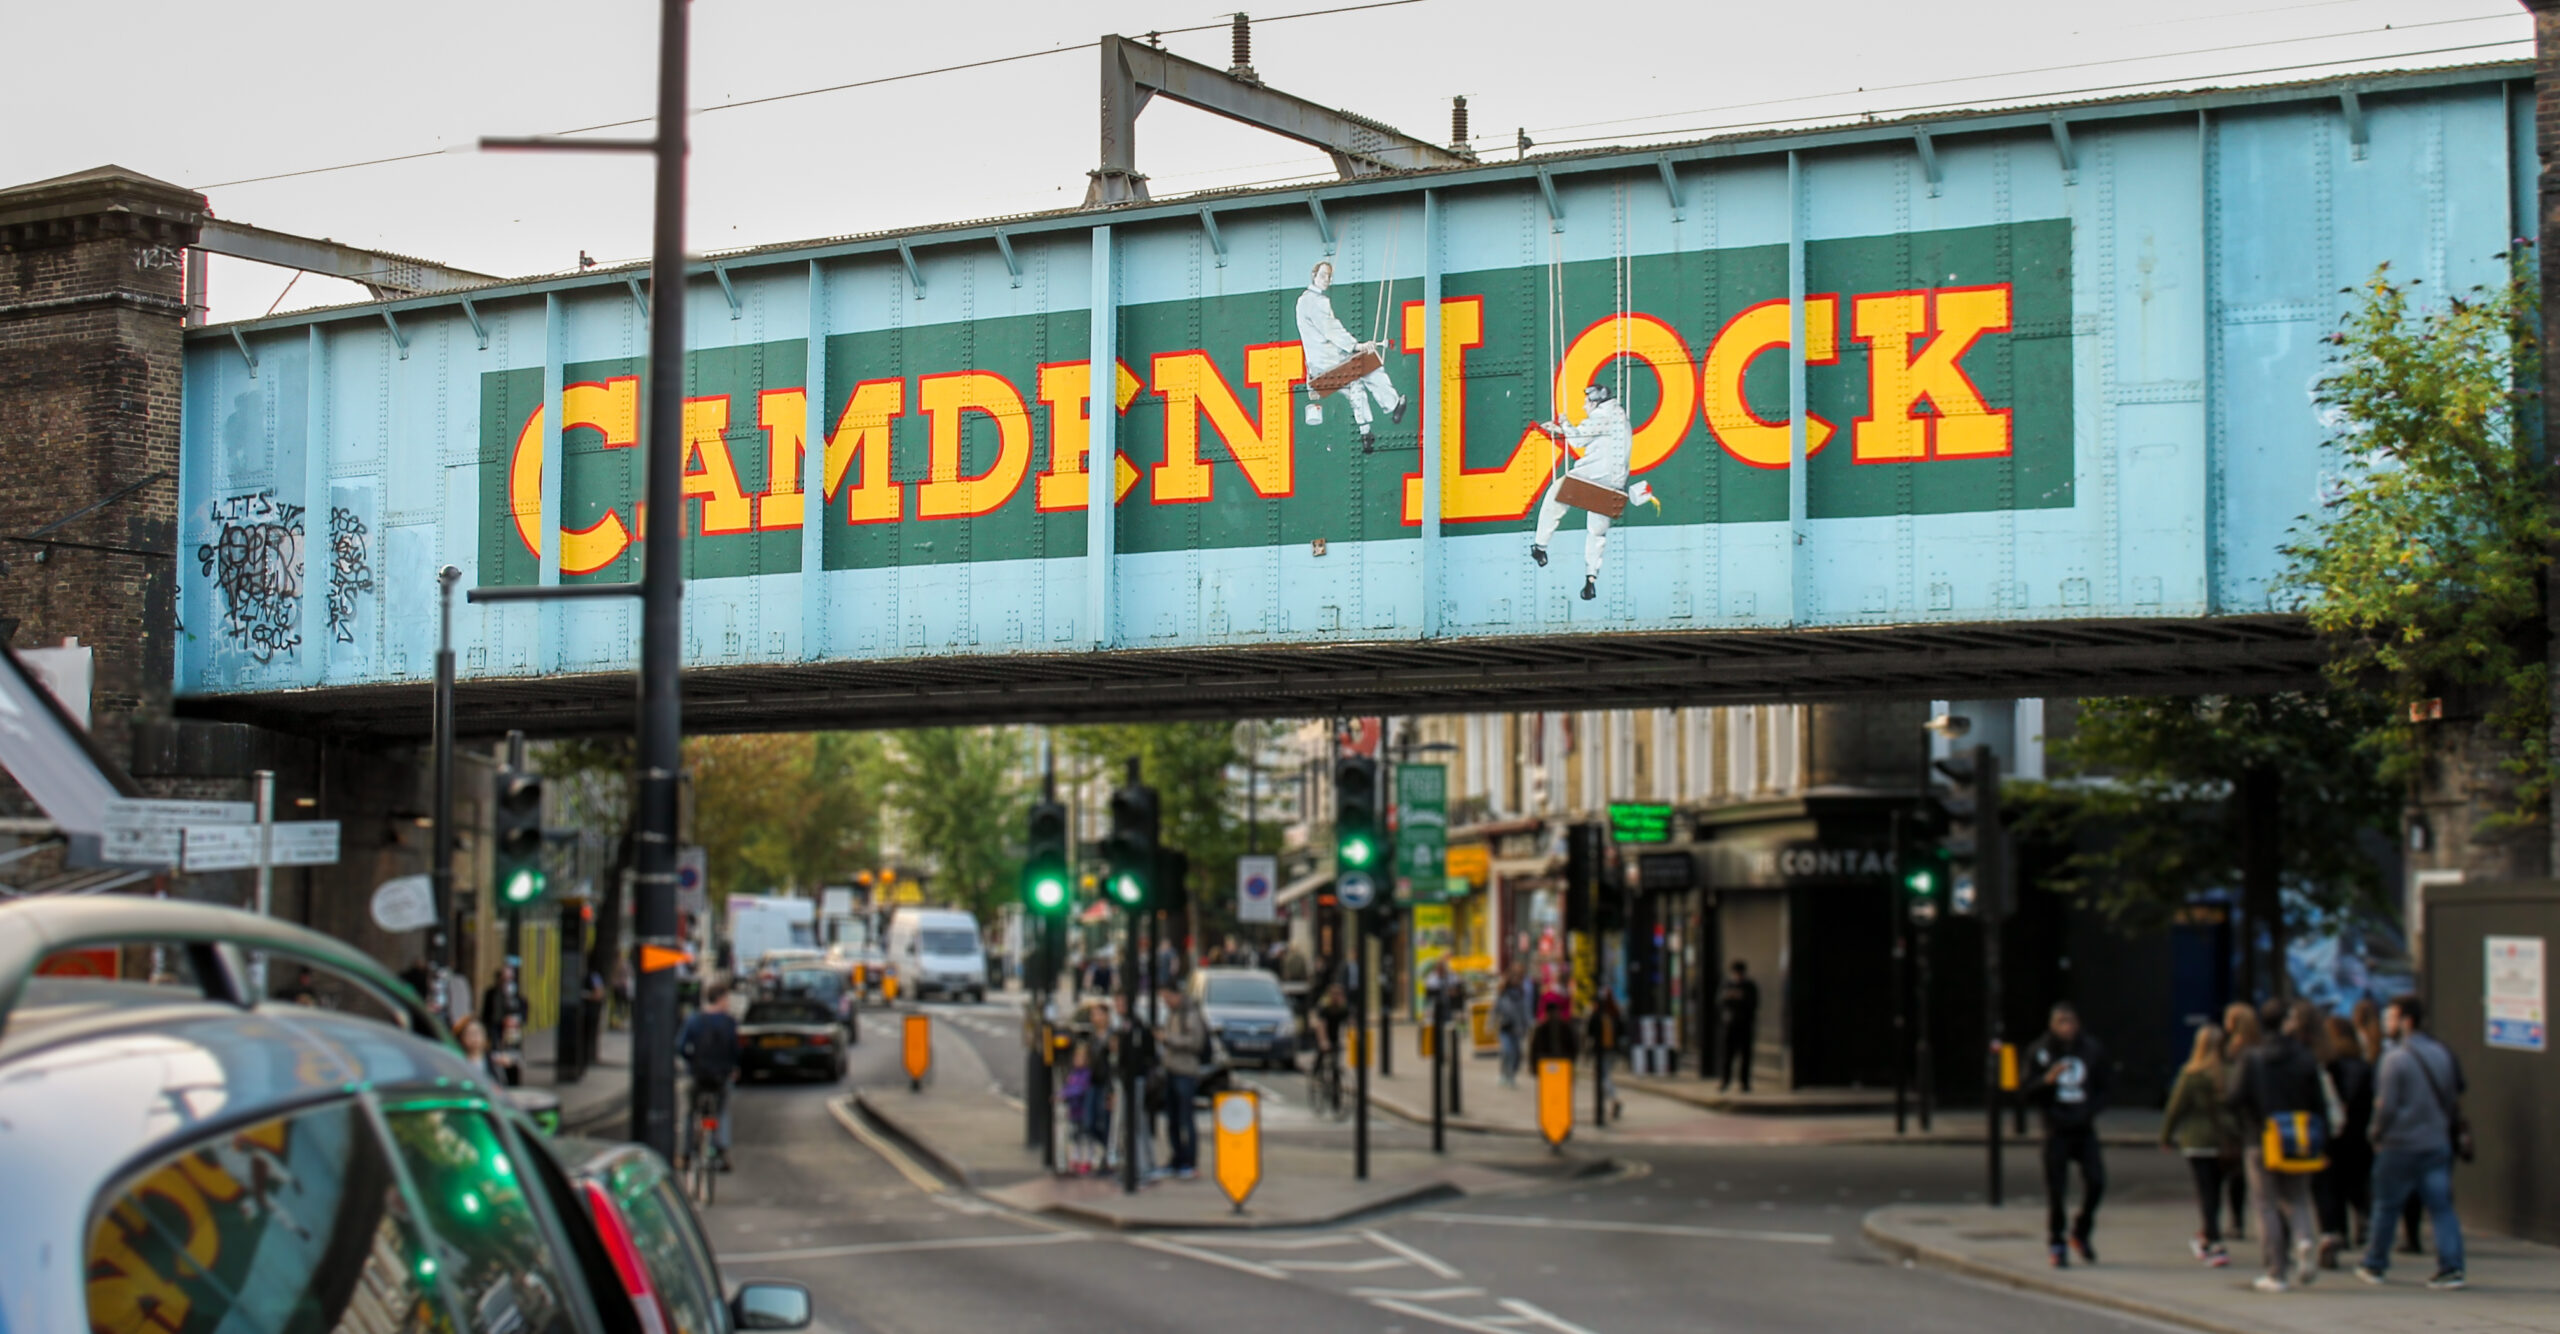 CAMDEN TOWN, LONDON, UNITED KINGDOM - 2017: Road Sign to the World Famous Camden Market